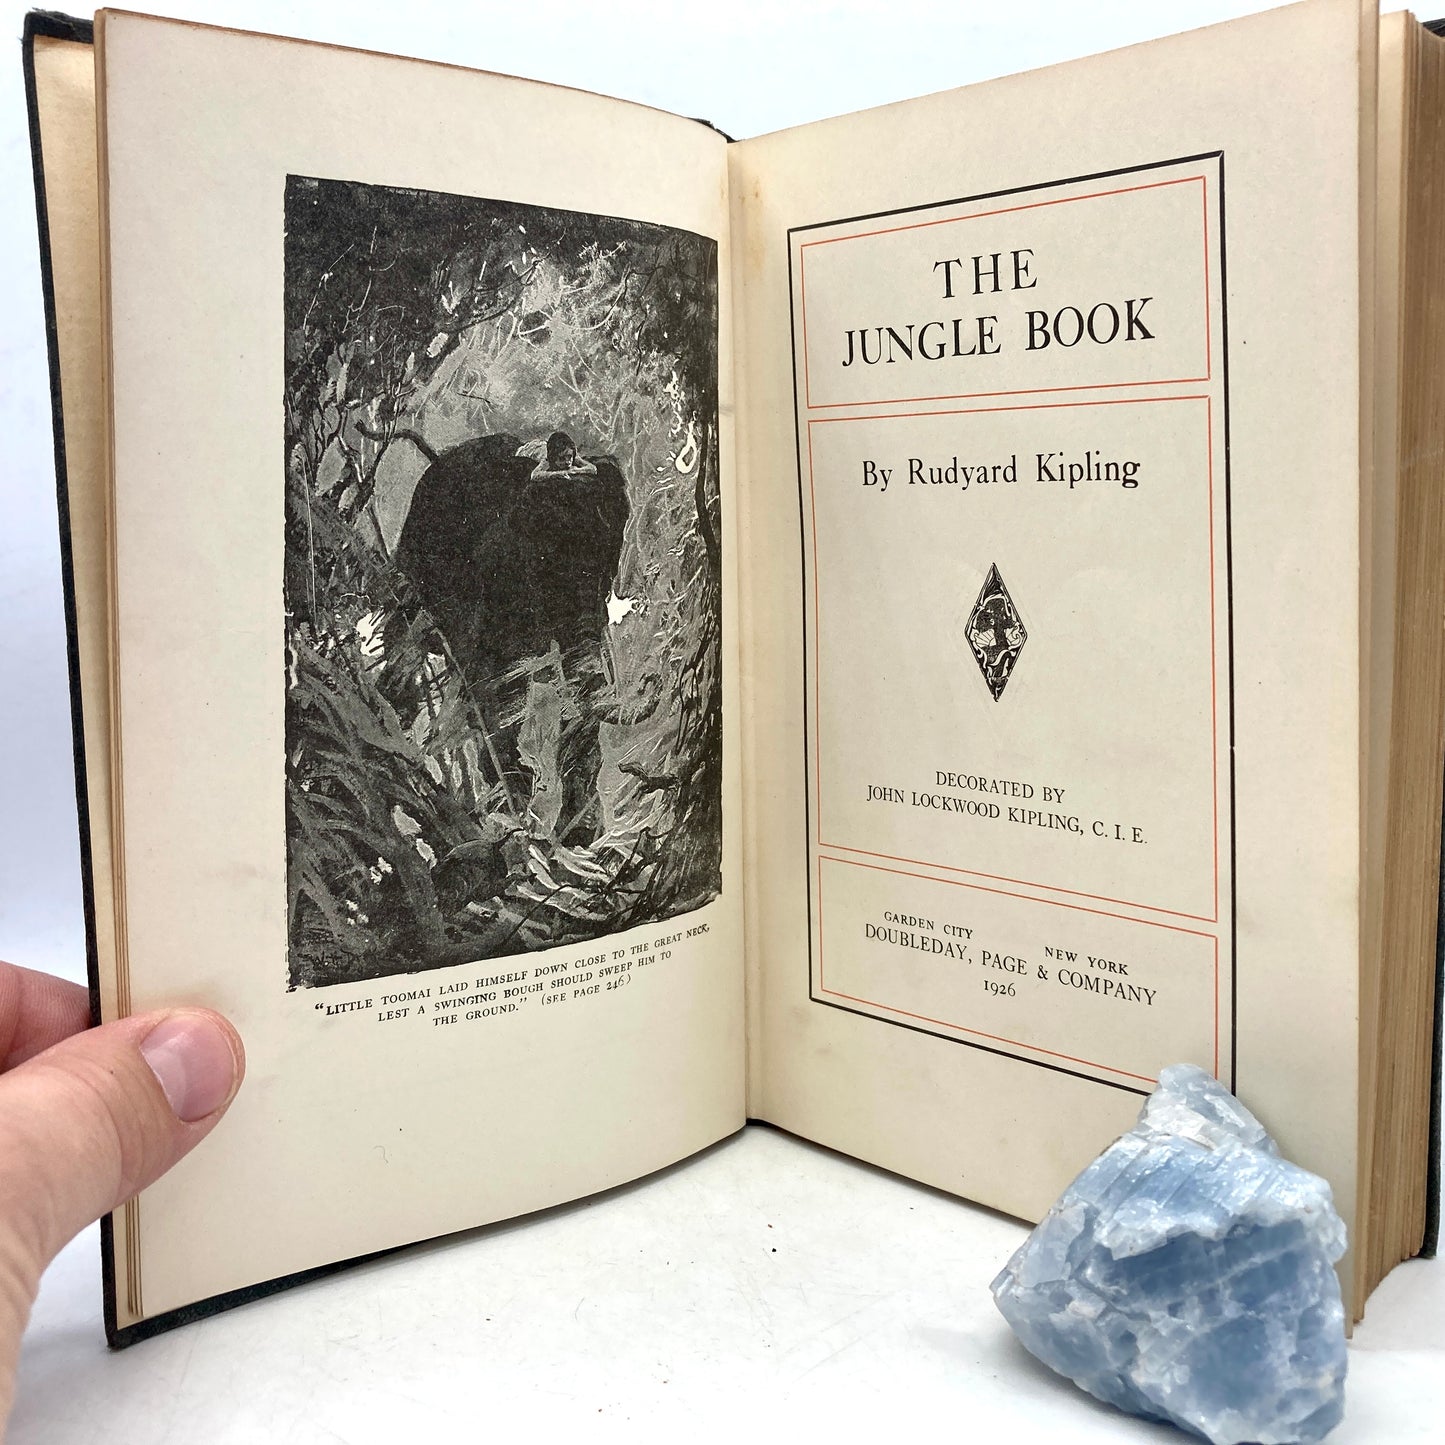 KIPLING, Rudyard "The Jungle Book" [Doubleday, Page & Co, 1926]